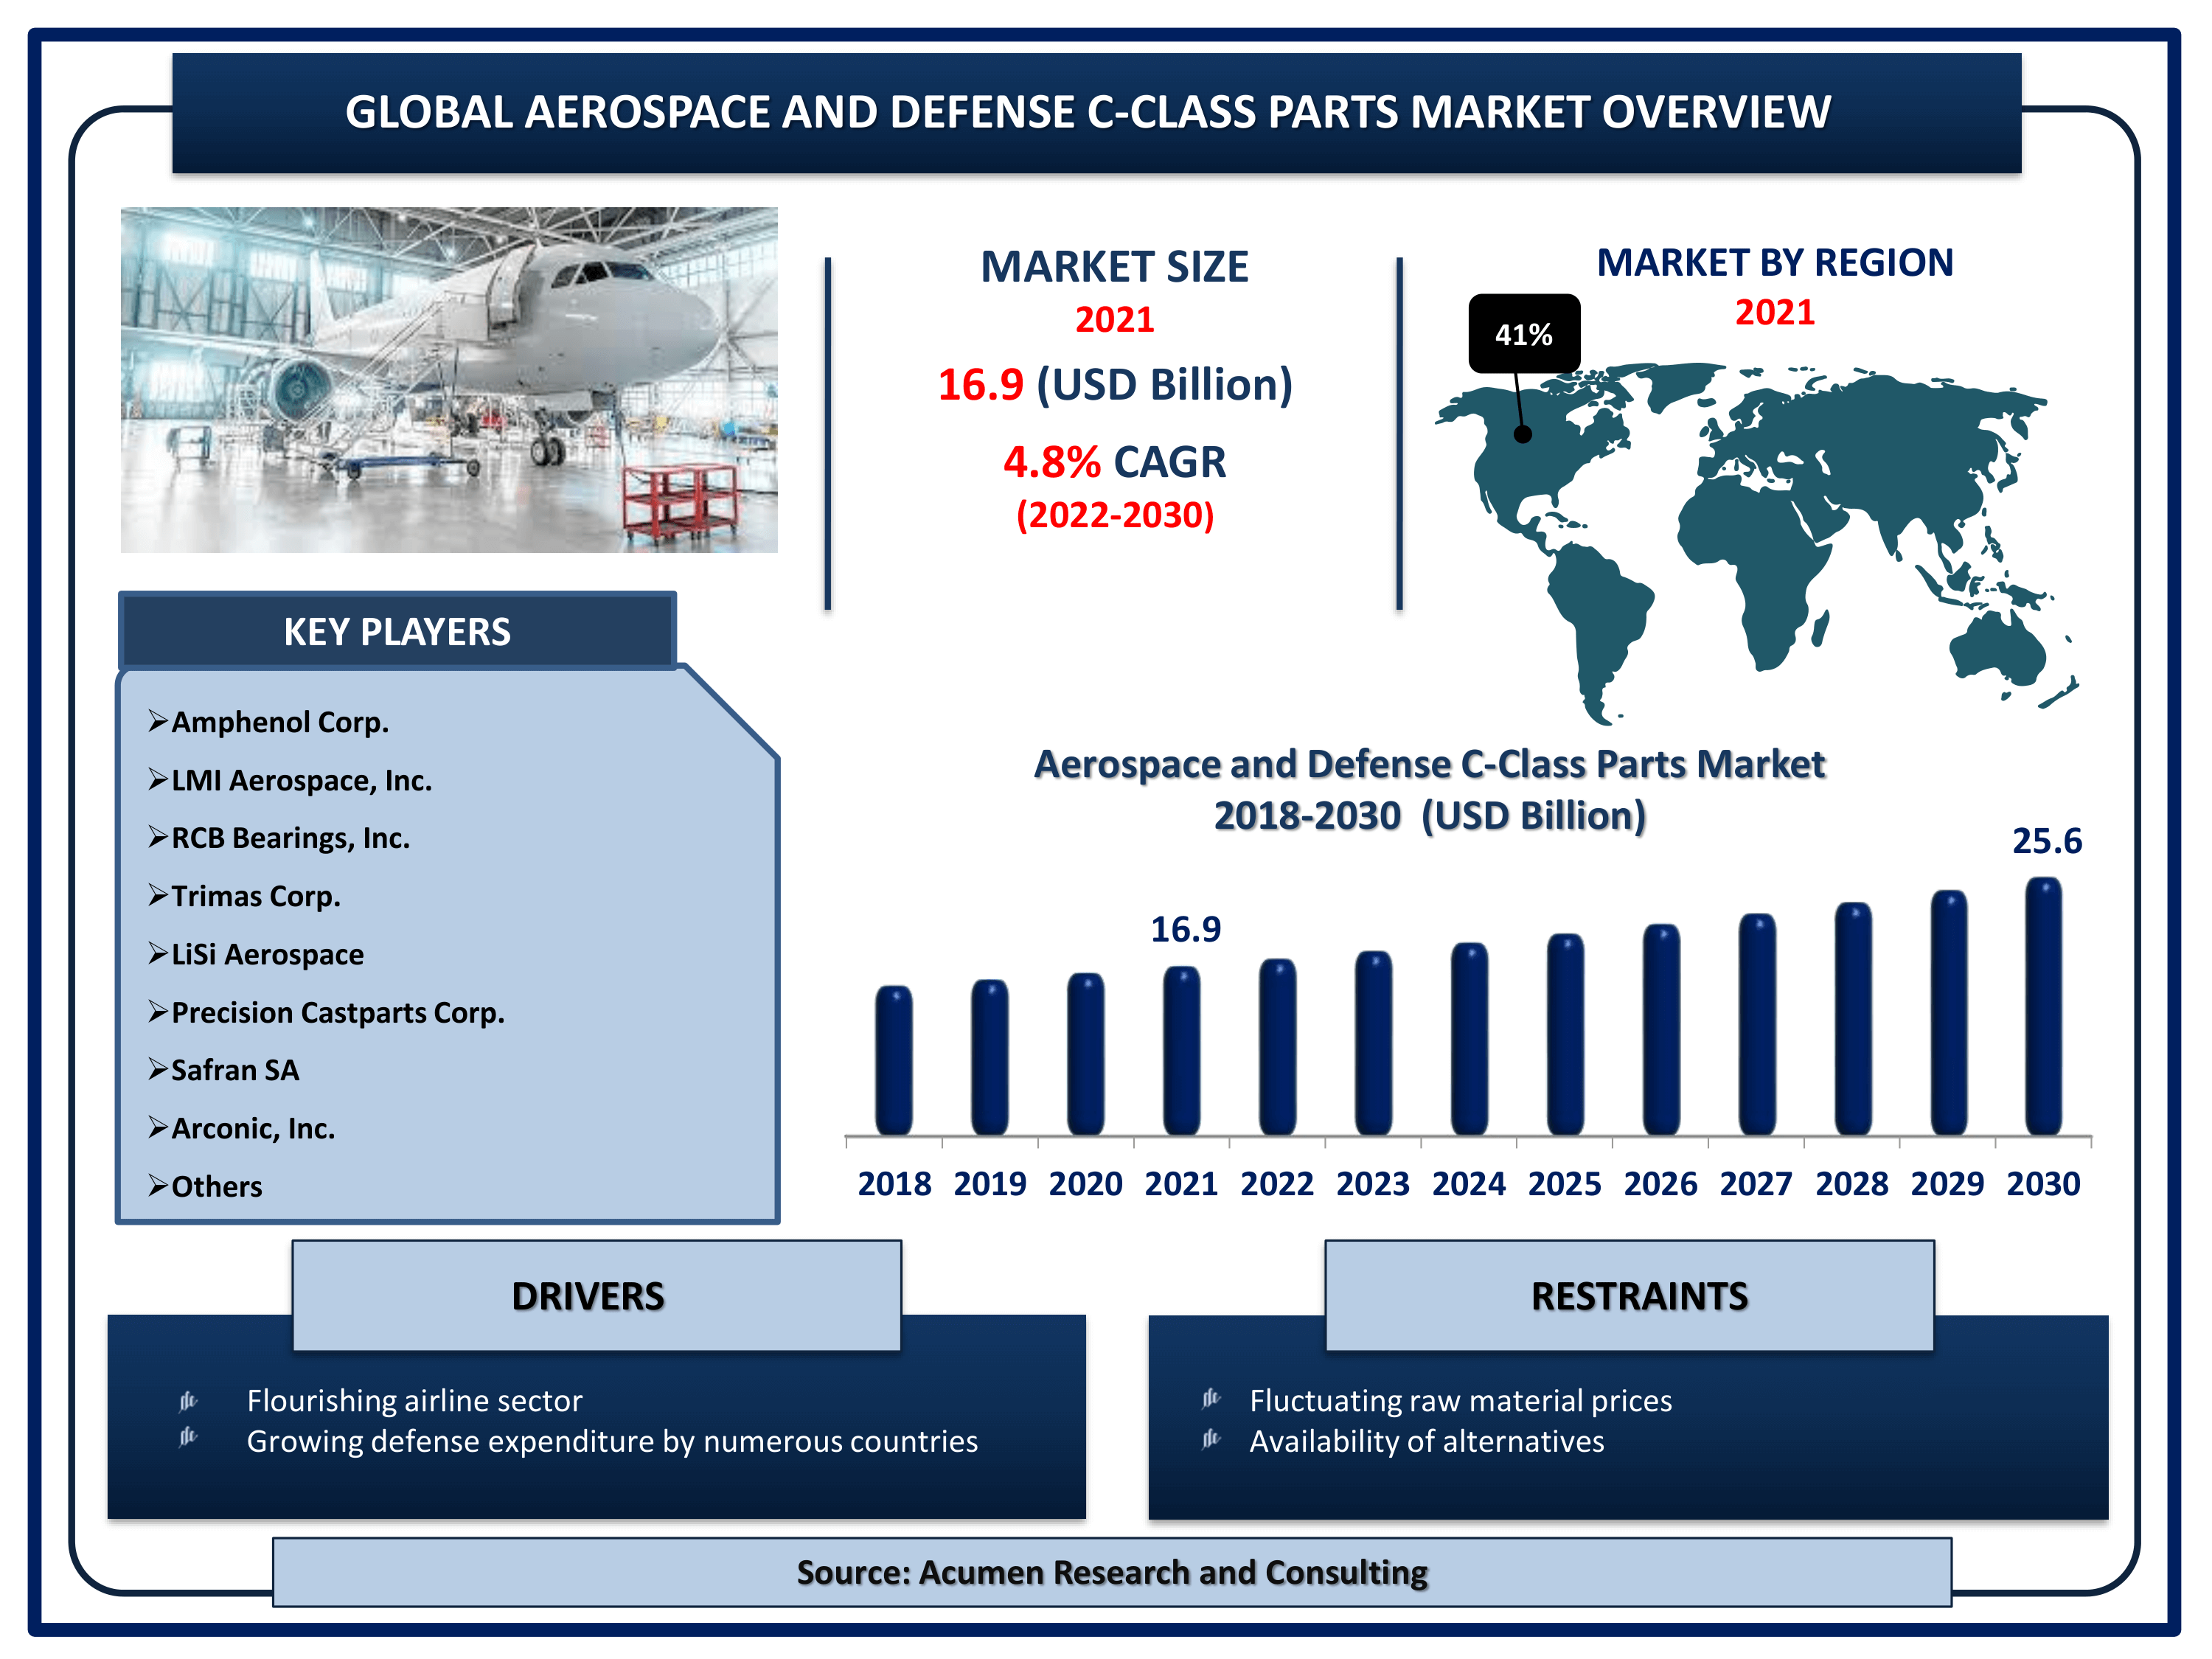 Global aerospace and defense c-class parts market revenue is estimated to reach USD 25.6 Billion by 2030 with a CAGR of 4.8% from 2022 to 2030